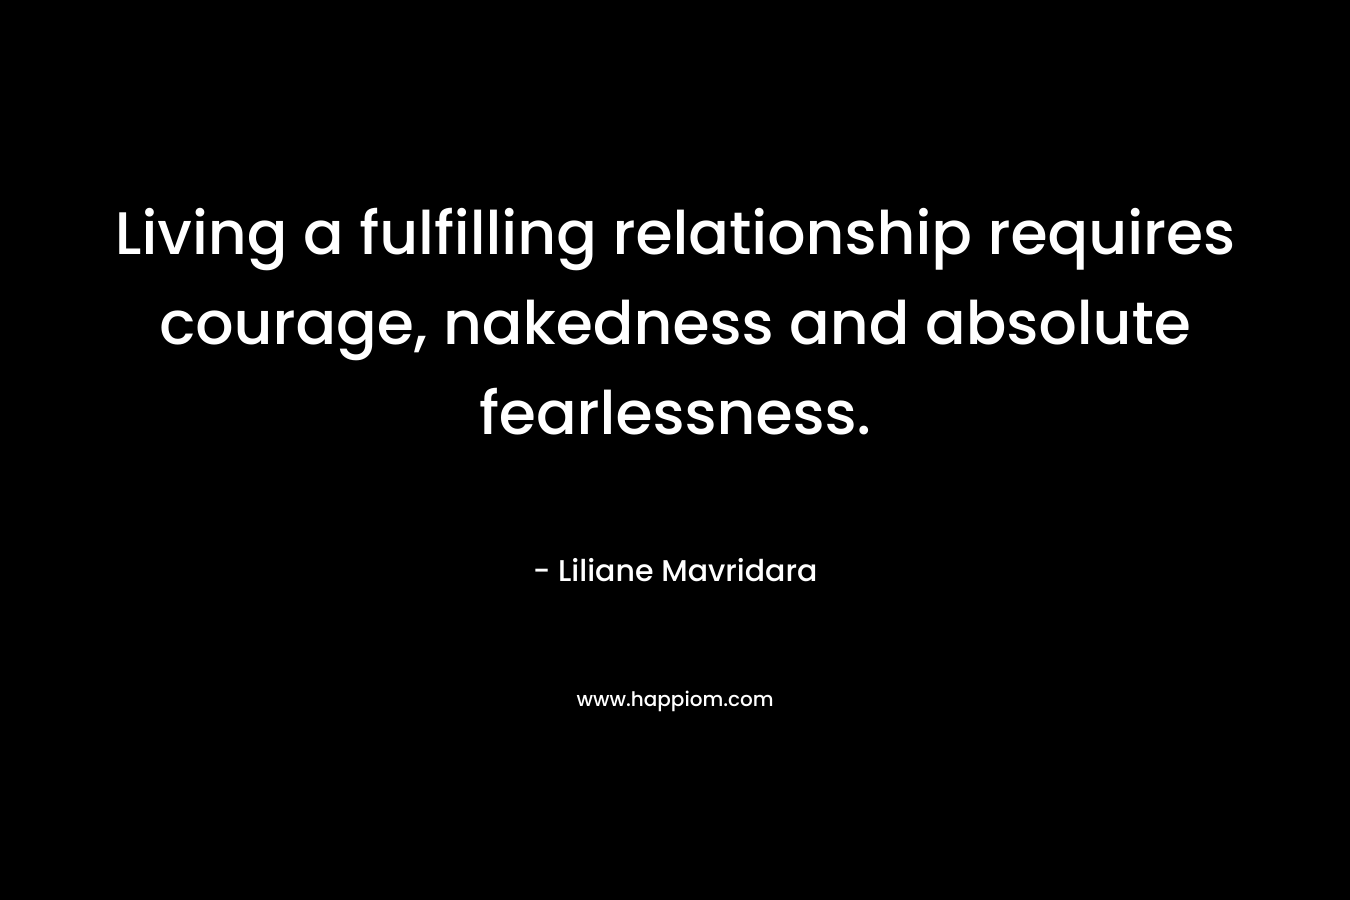 Living a fulfilling relationship requires courage, nakedness and absolute fearlessness. – Liliane Mavridara